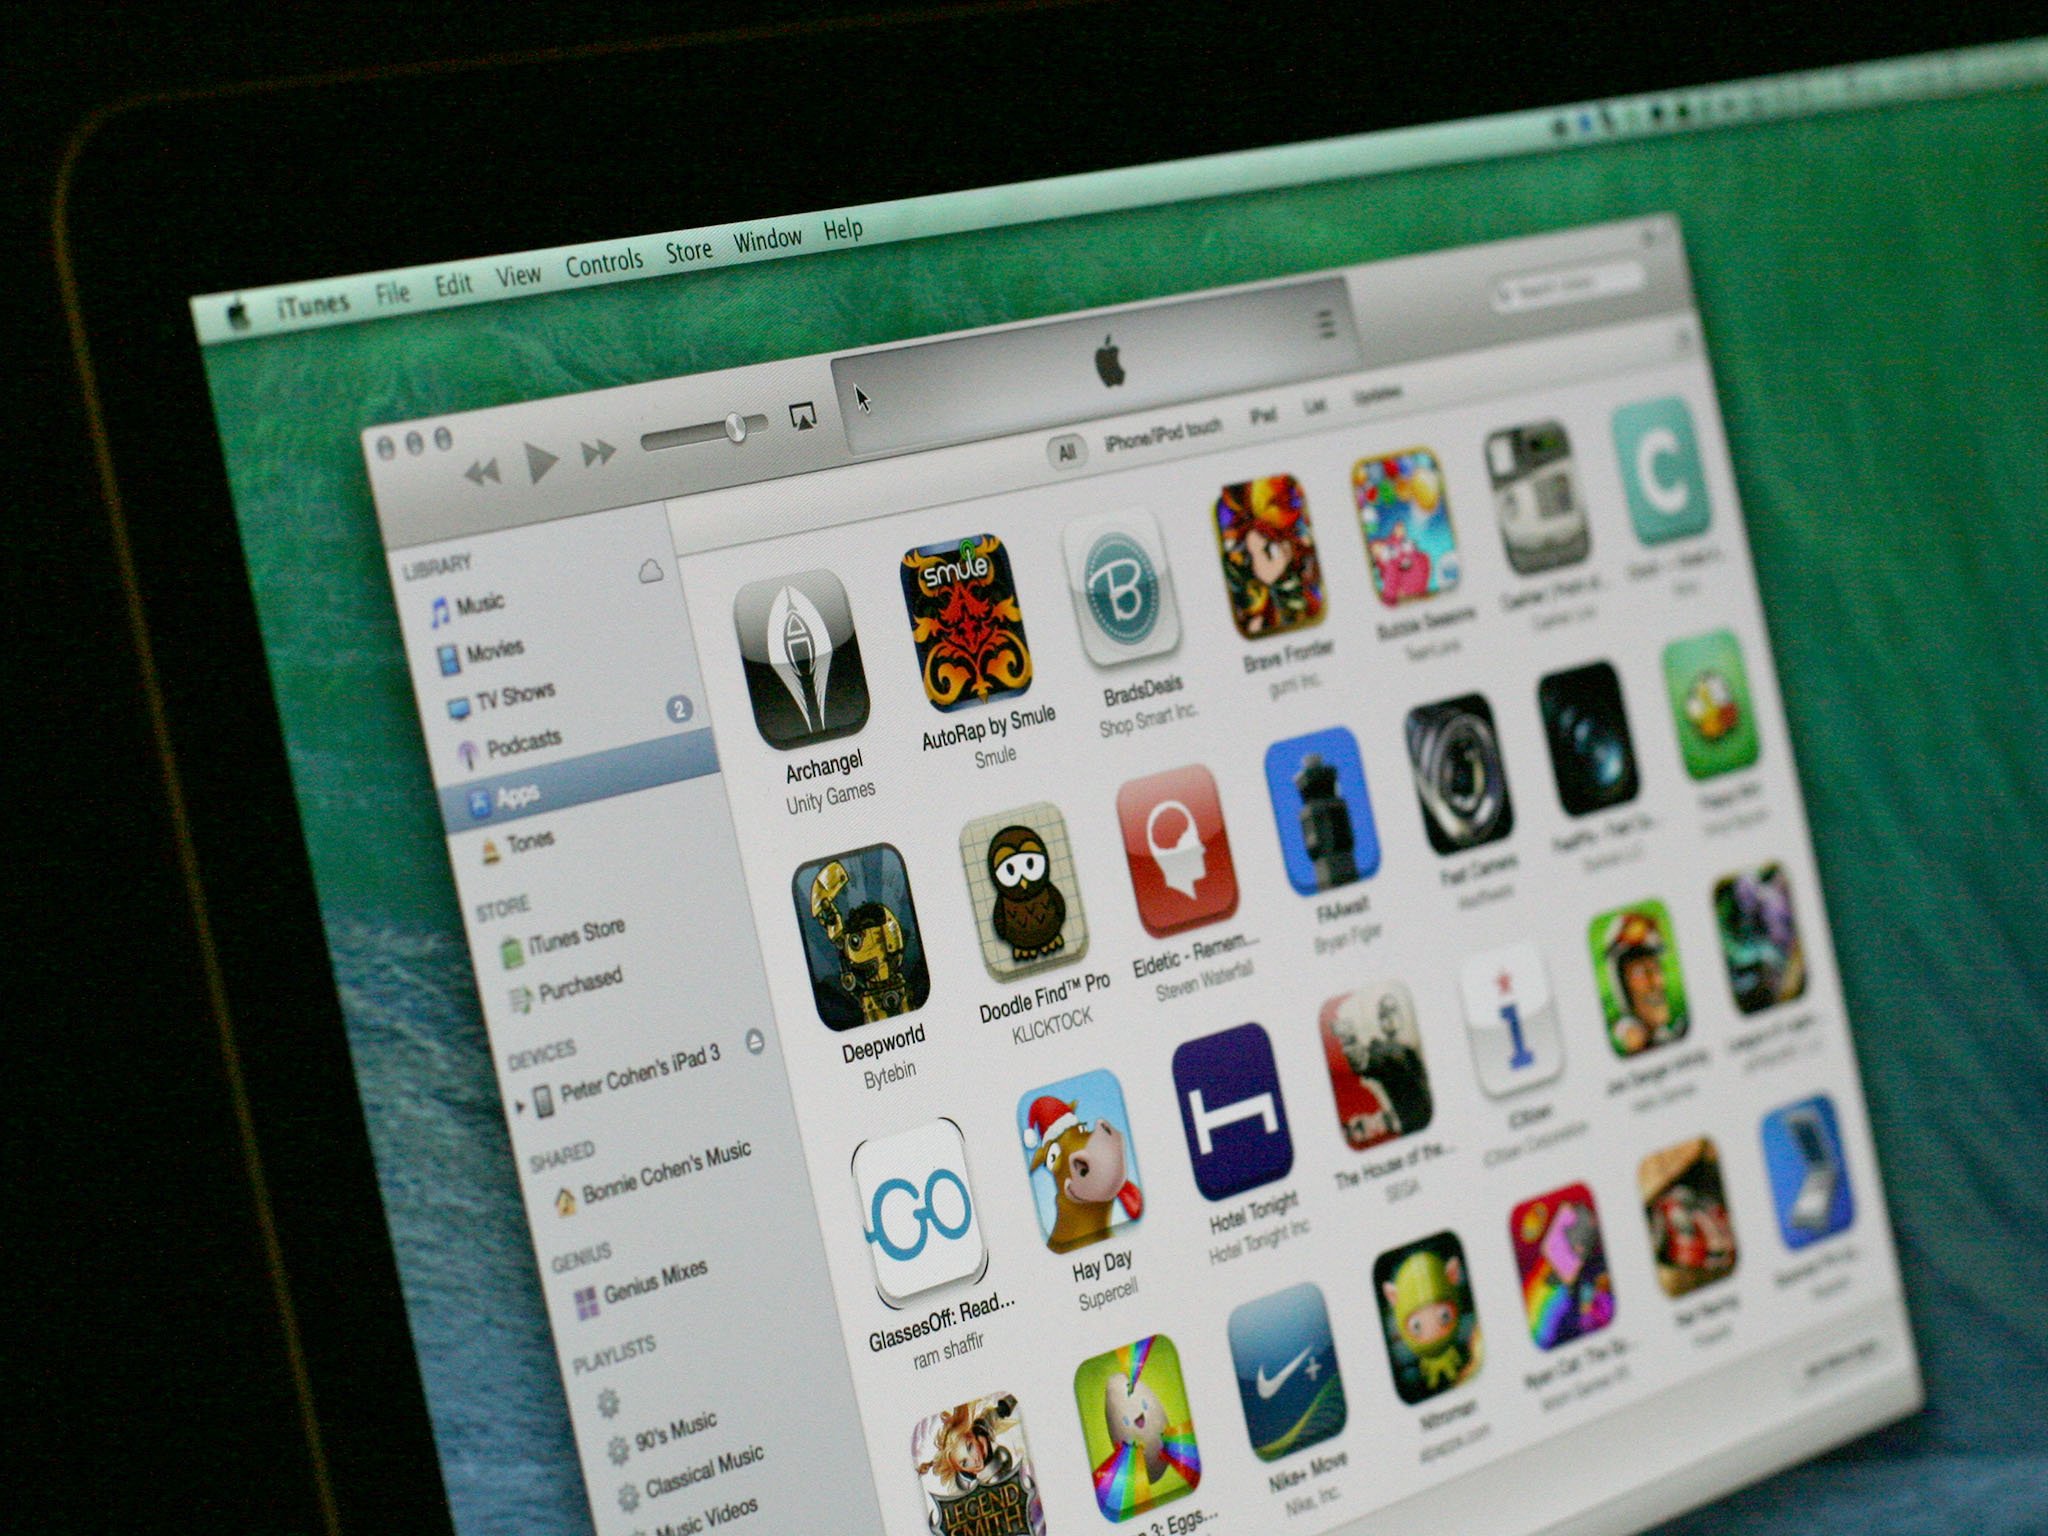 iTunes 11.1.5 is out; fixes bugs, improves iBooks on Mavericks